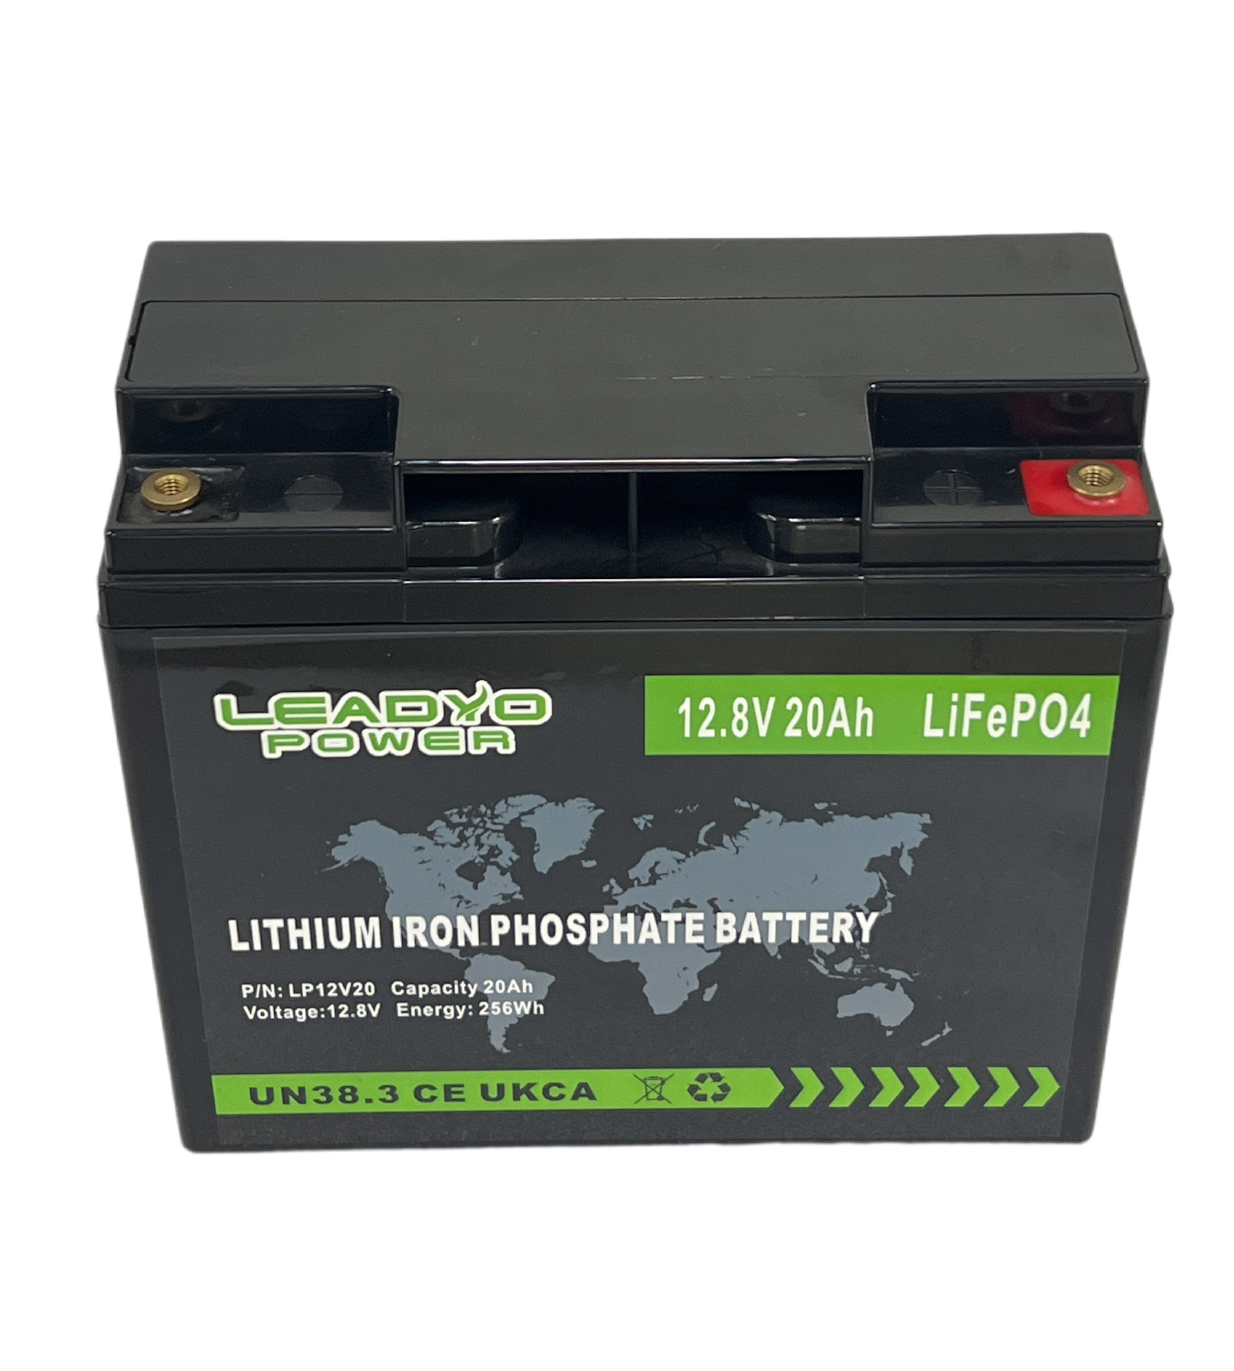 Leadyo Power: Enhancing Industrial Efficiency with Advanced Lifepo4 Batteries